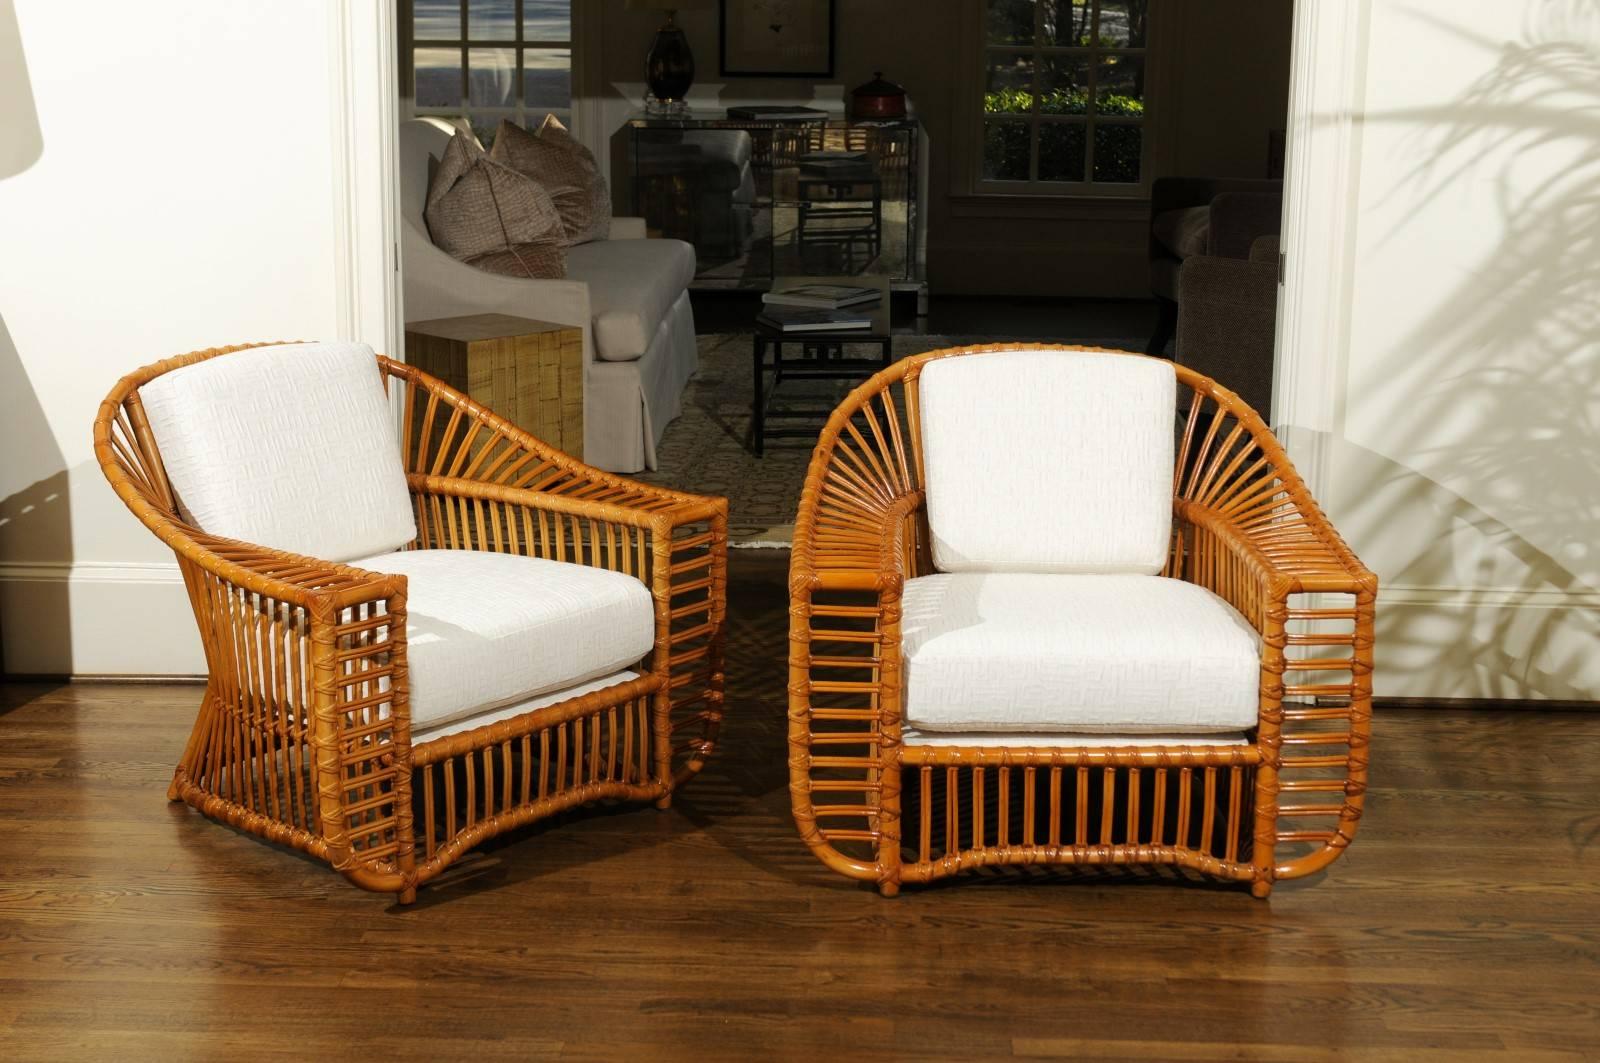 An exquisite and unique pair of lounge or club chairs by the esteemed Henry Olko for his Willow and Reed firm, circa 1979. These rare chairs are from the Tiara series. Stout and sturdy rattan and hardwood construction with exacting detail. These